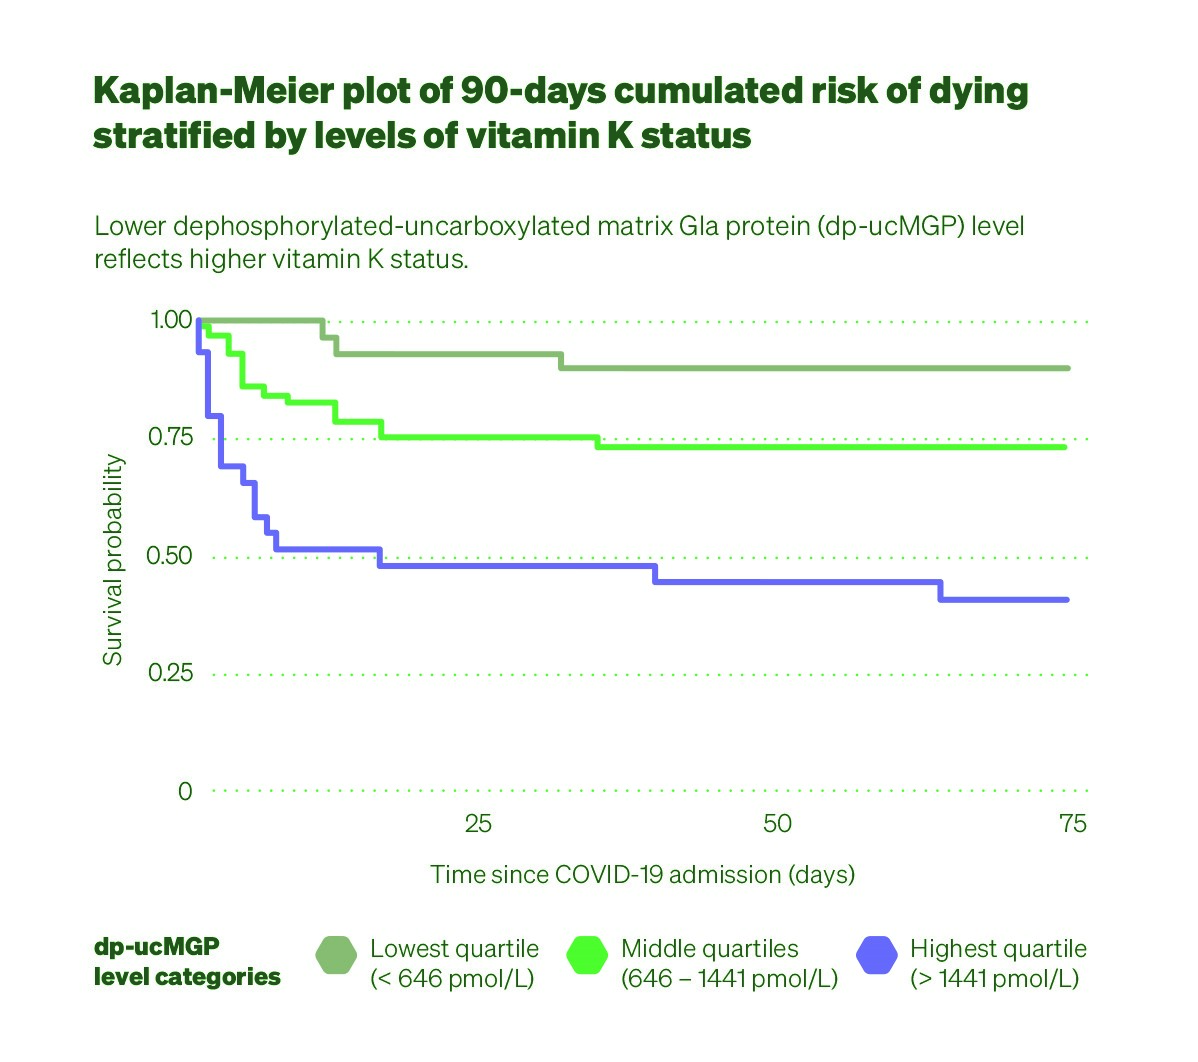 Kaplan-Meier plot of 30-days cumulated risk of dying, stratified by levels of vitamin K status. Lower dephosphorylated uncarboxylated matrix Gla protein (dp-uc-MGP) level reflects higher vitamin K status